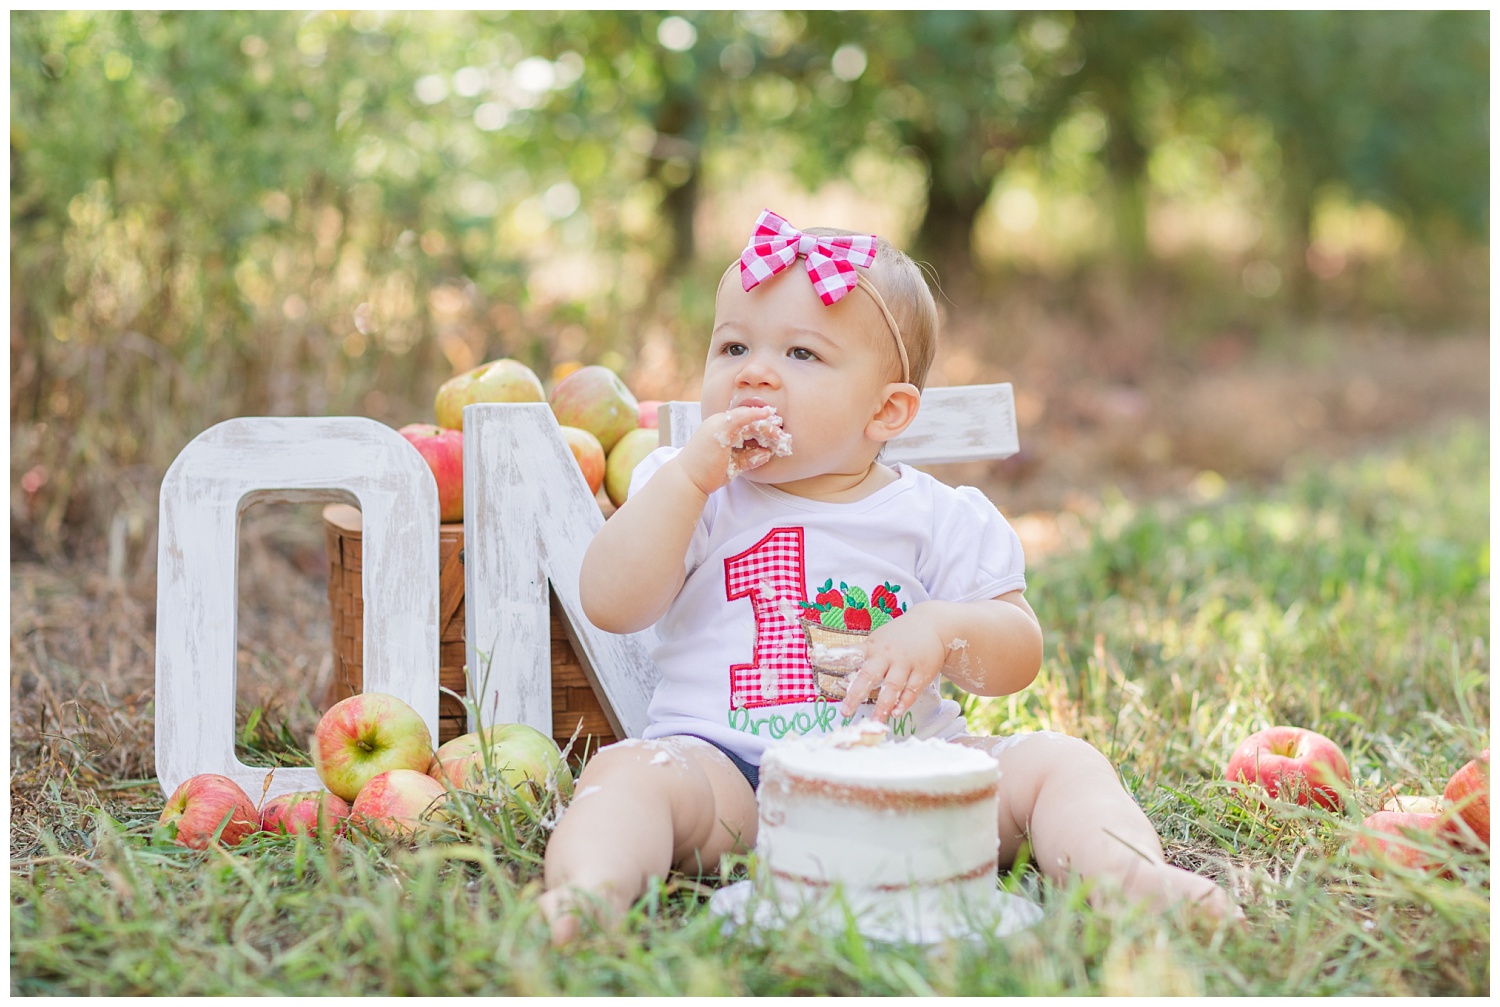 cake smash session for 1st birthday in Clyde, Ohio